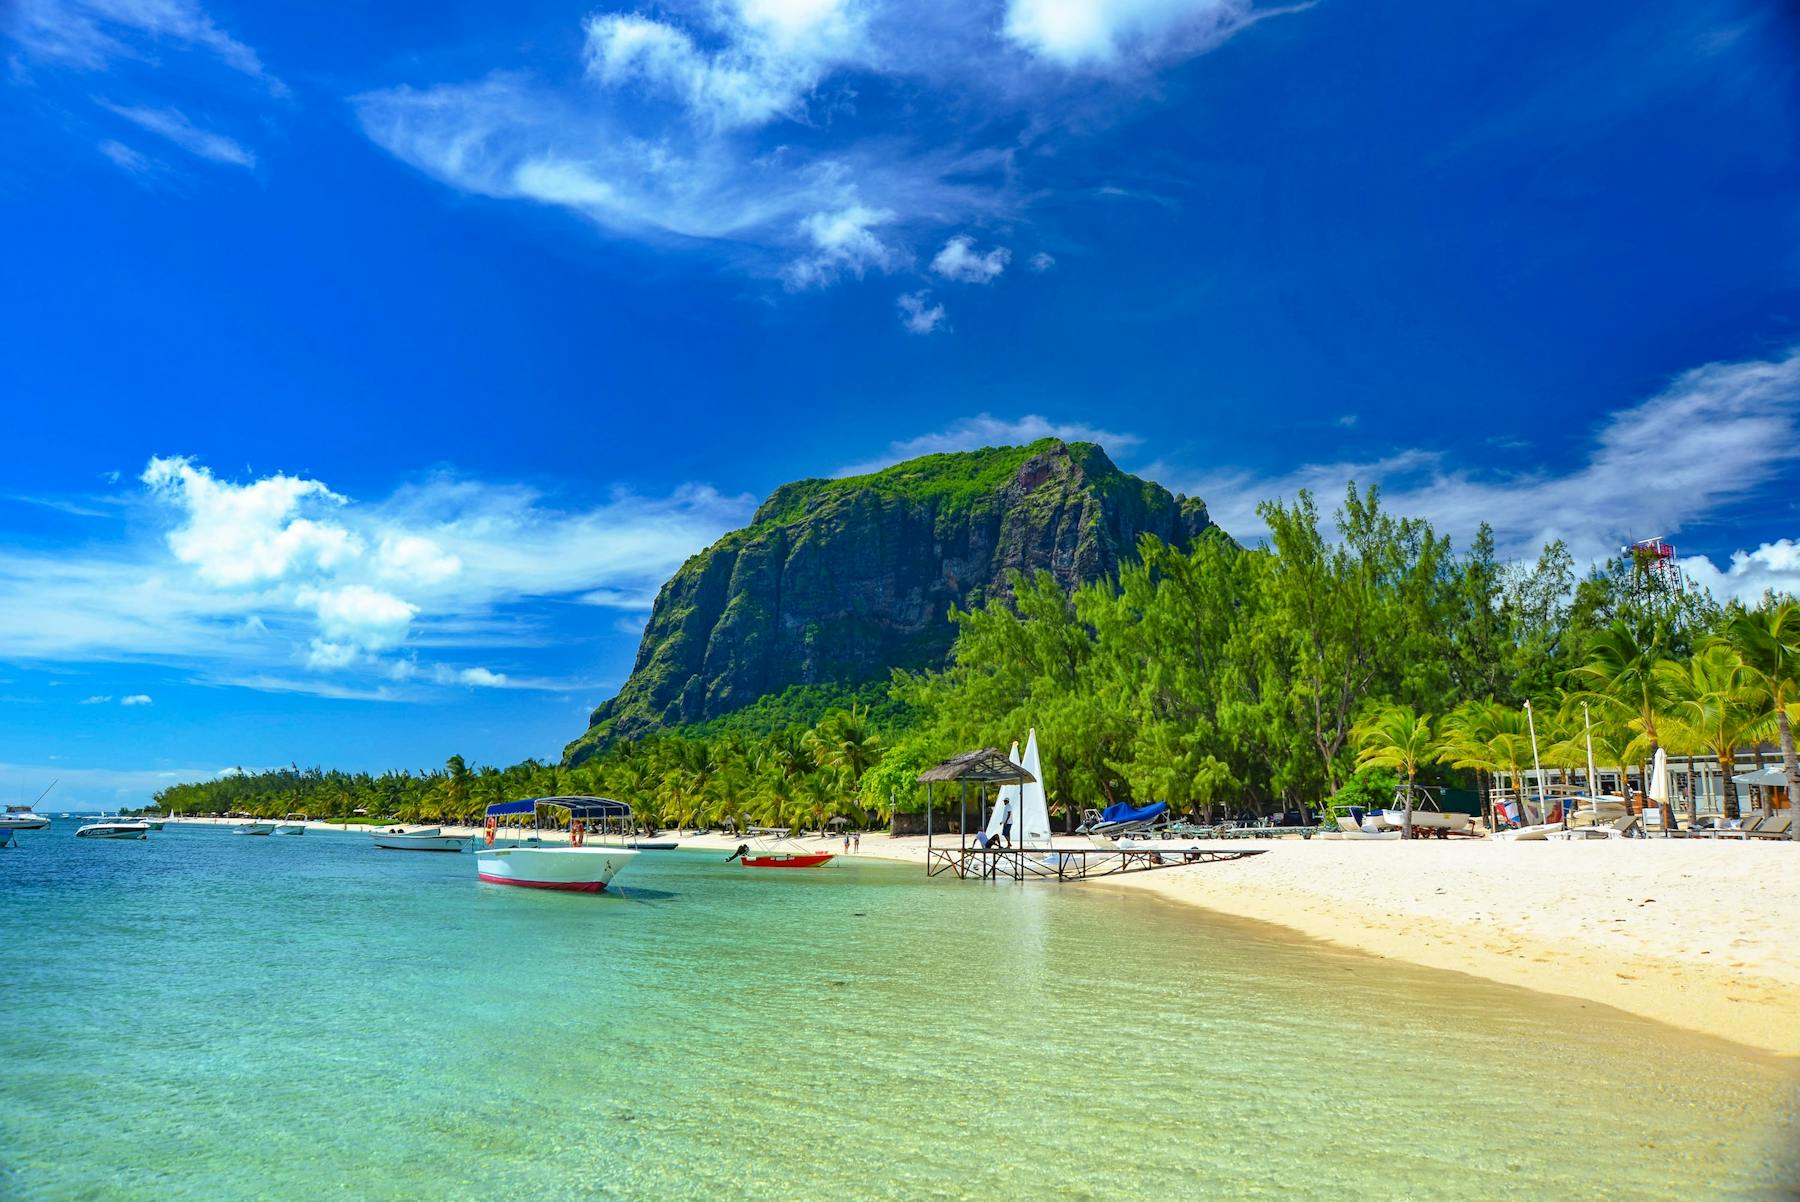 Beach and boats in Mauritius